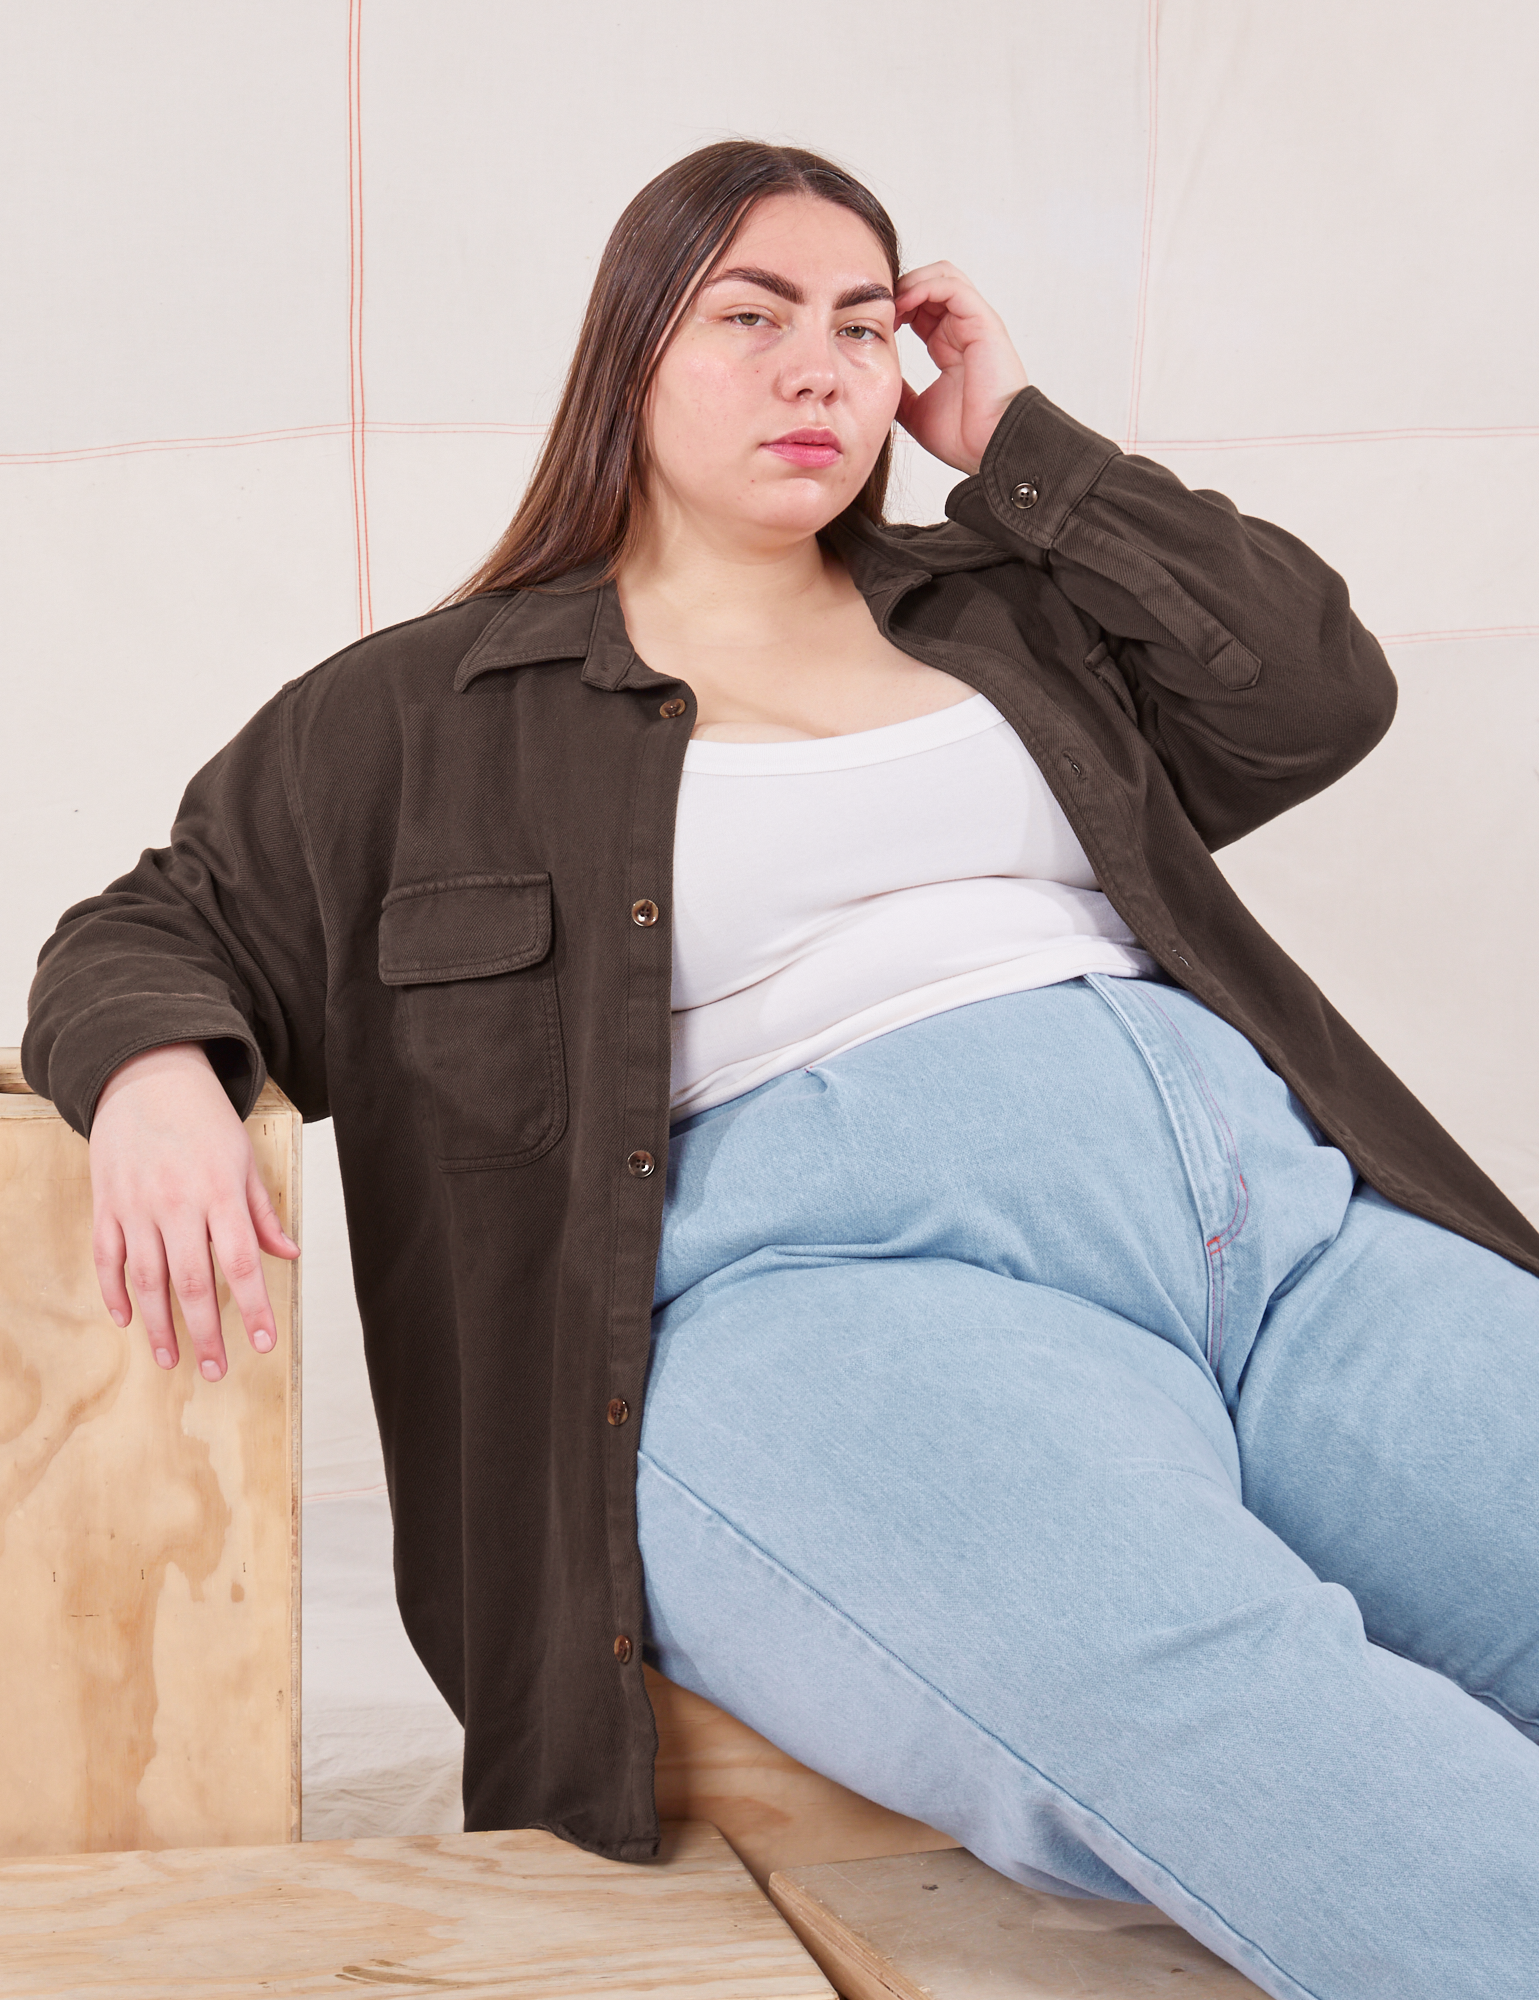 Marielena is wearing Flannel Overshirt in Espresso Brown, vintage off-white Cropped Tank Top and light wash Trouser Jeans